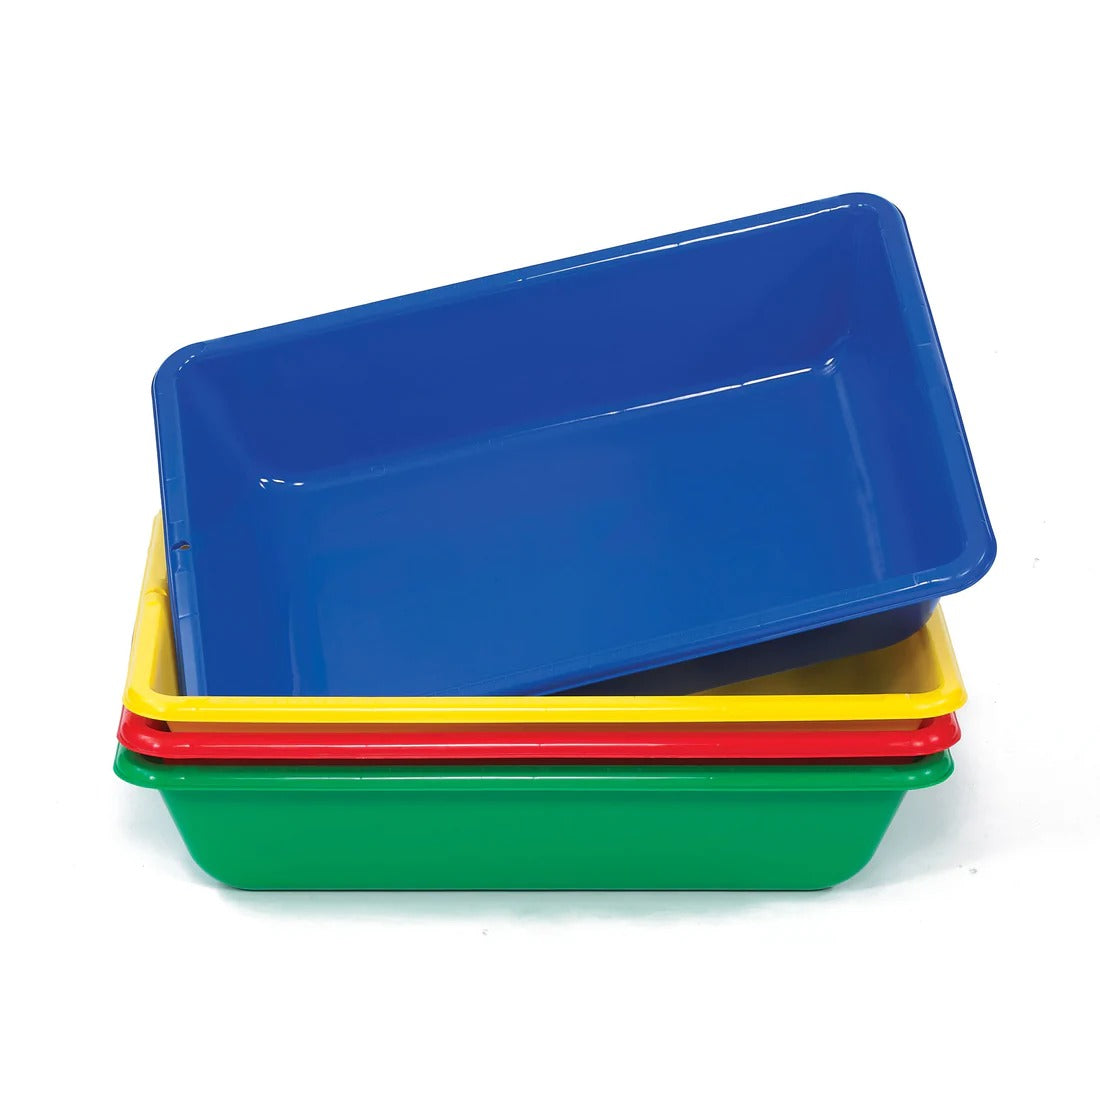 Coloured Desktop Sand and Water Tray Fun Pack Of 4, These stackable colour sand and water trays are ideal for children to create sand, water and messy play. The Colour sand and water trays are ideal for nurseries and classrooms with limited space. The Colour Sand & Water trays are easy to store away or transport. They are ideal for outdoor play or use indoors for sand, water or messy play. Why not try filling the sand and water trays with a range of different messy play materials. Discuss the different text